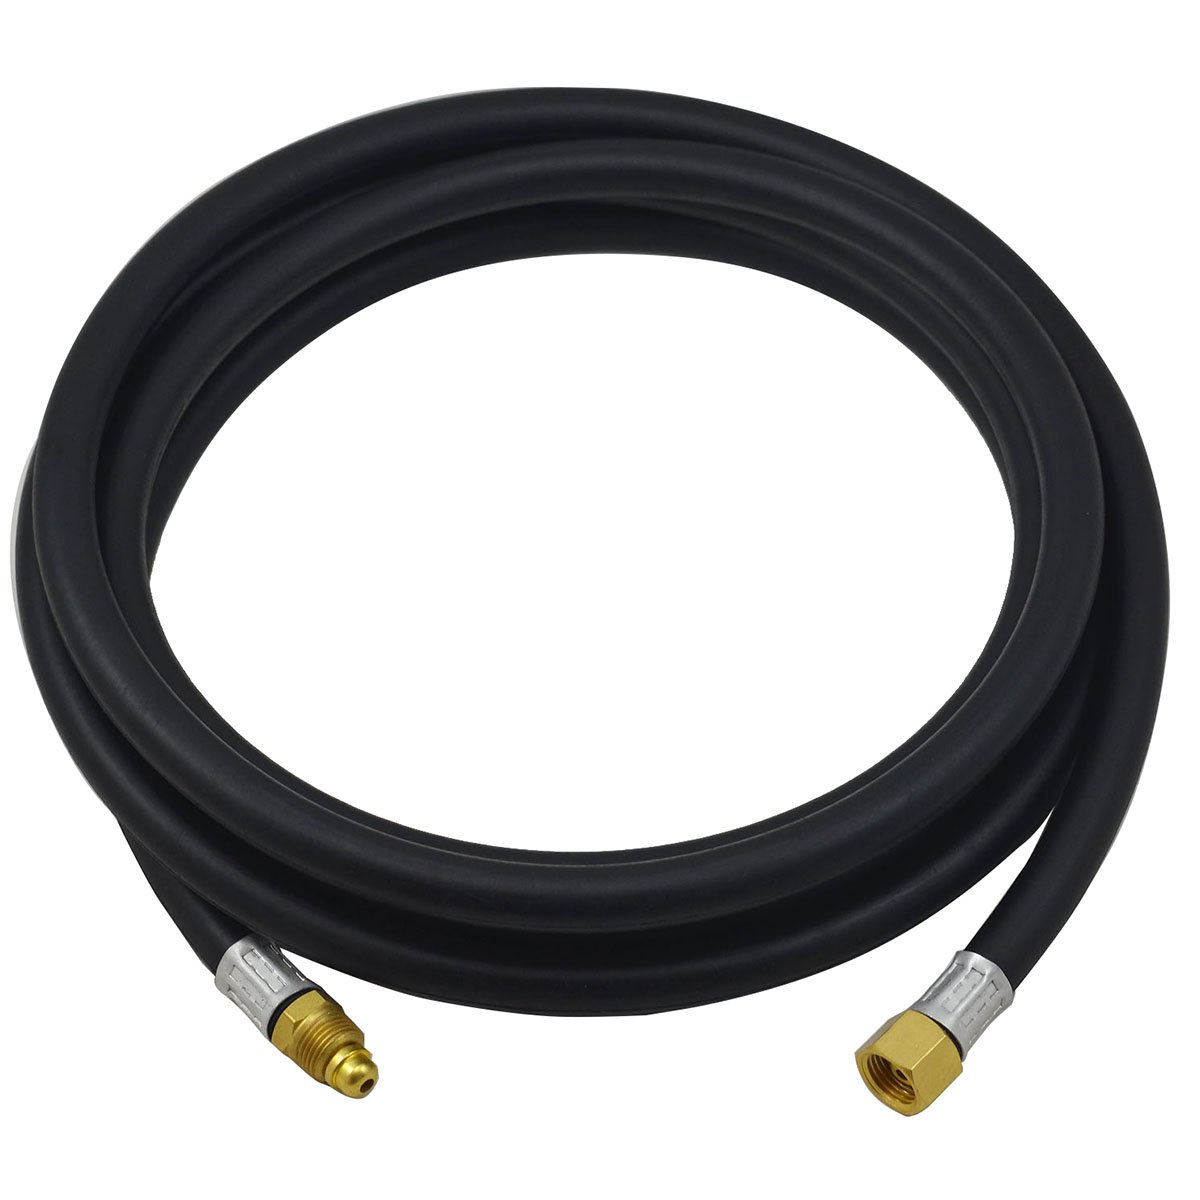 Power Cable for WP-26 Air-Cooled TIG Welding Torch 12 Feet 3.8 Meters